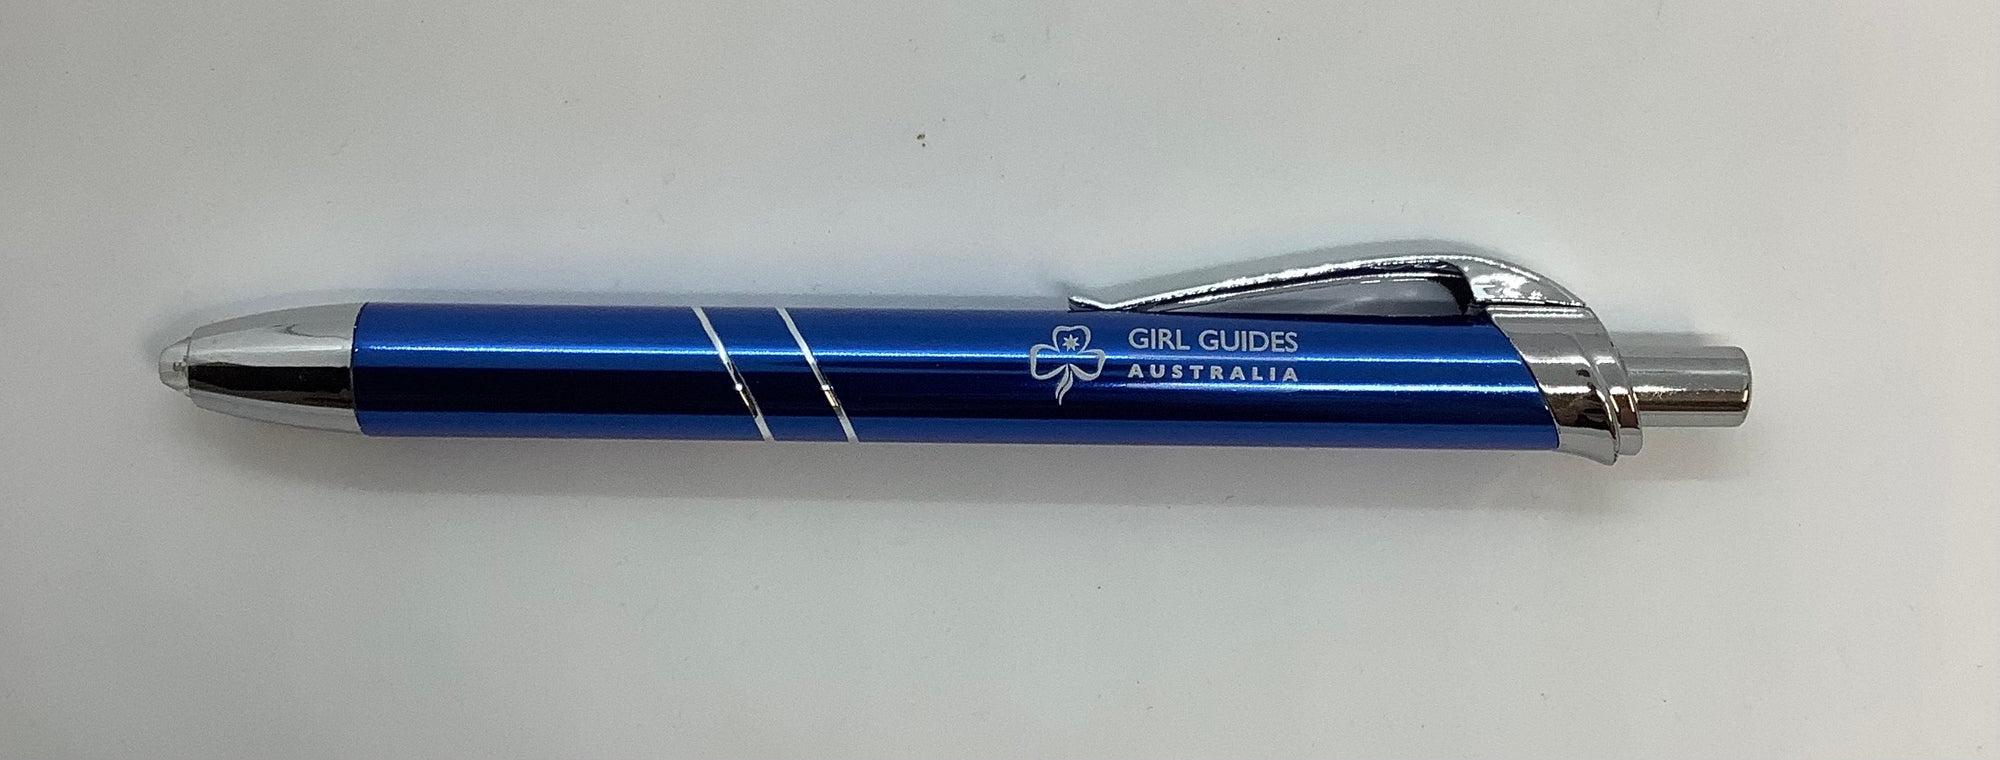 a blue and silver pen with a light up tip